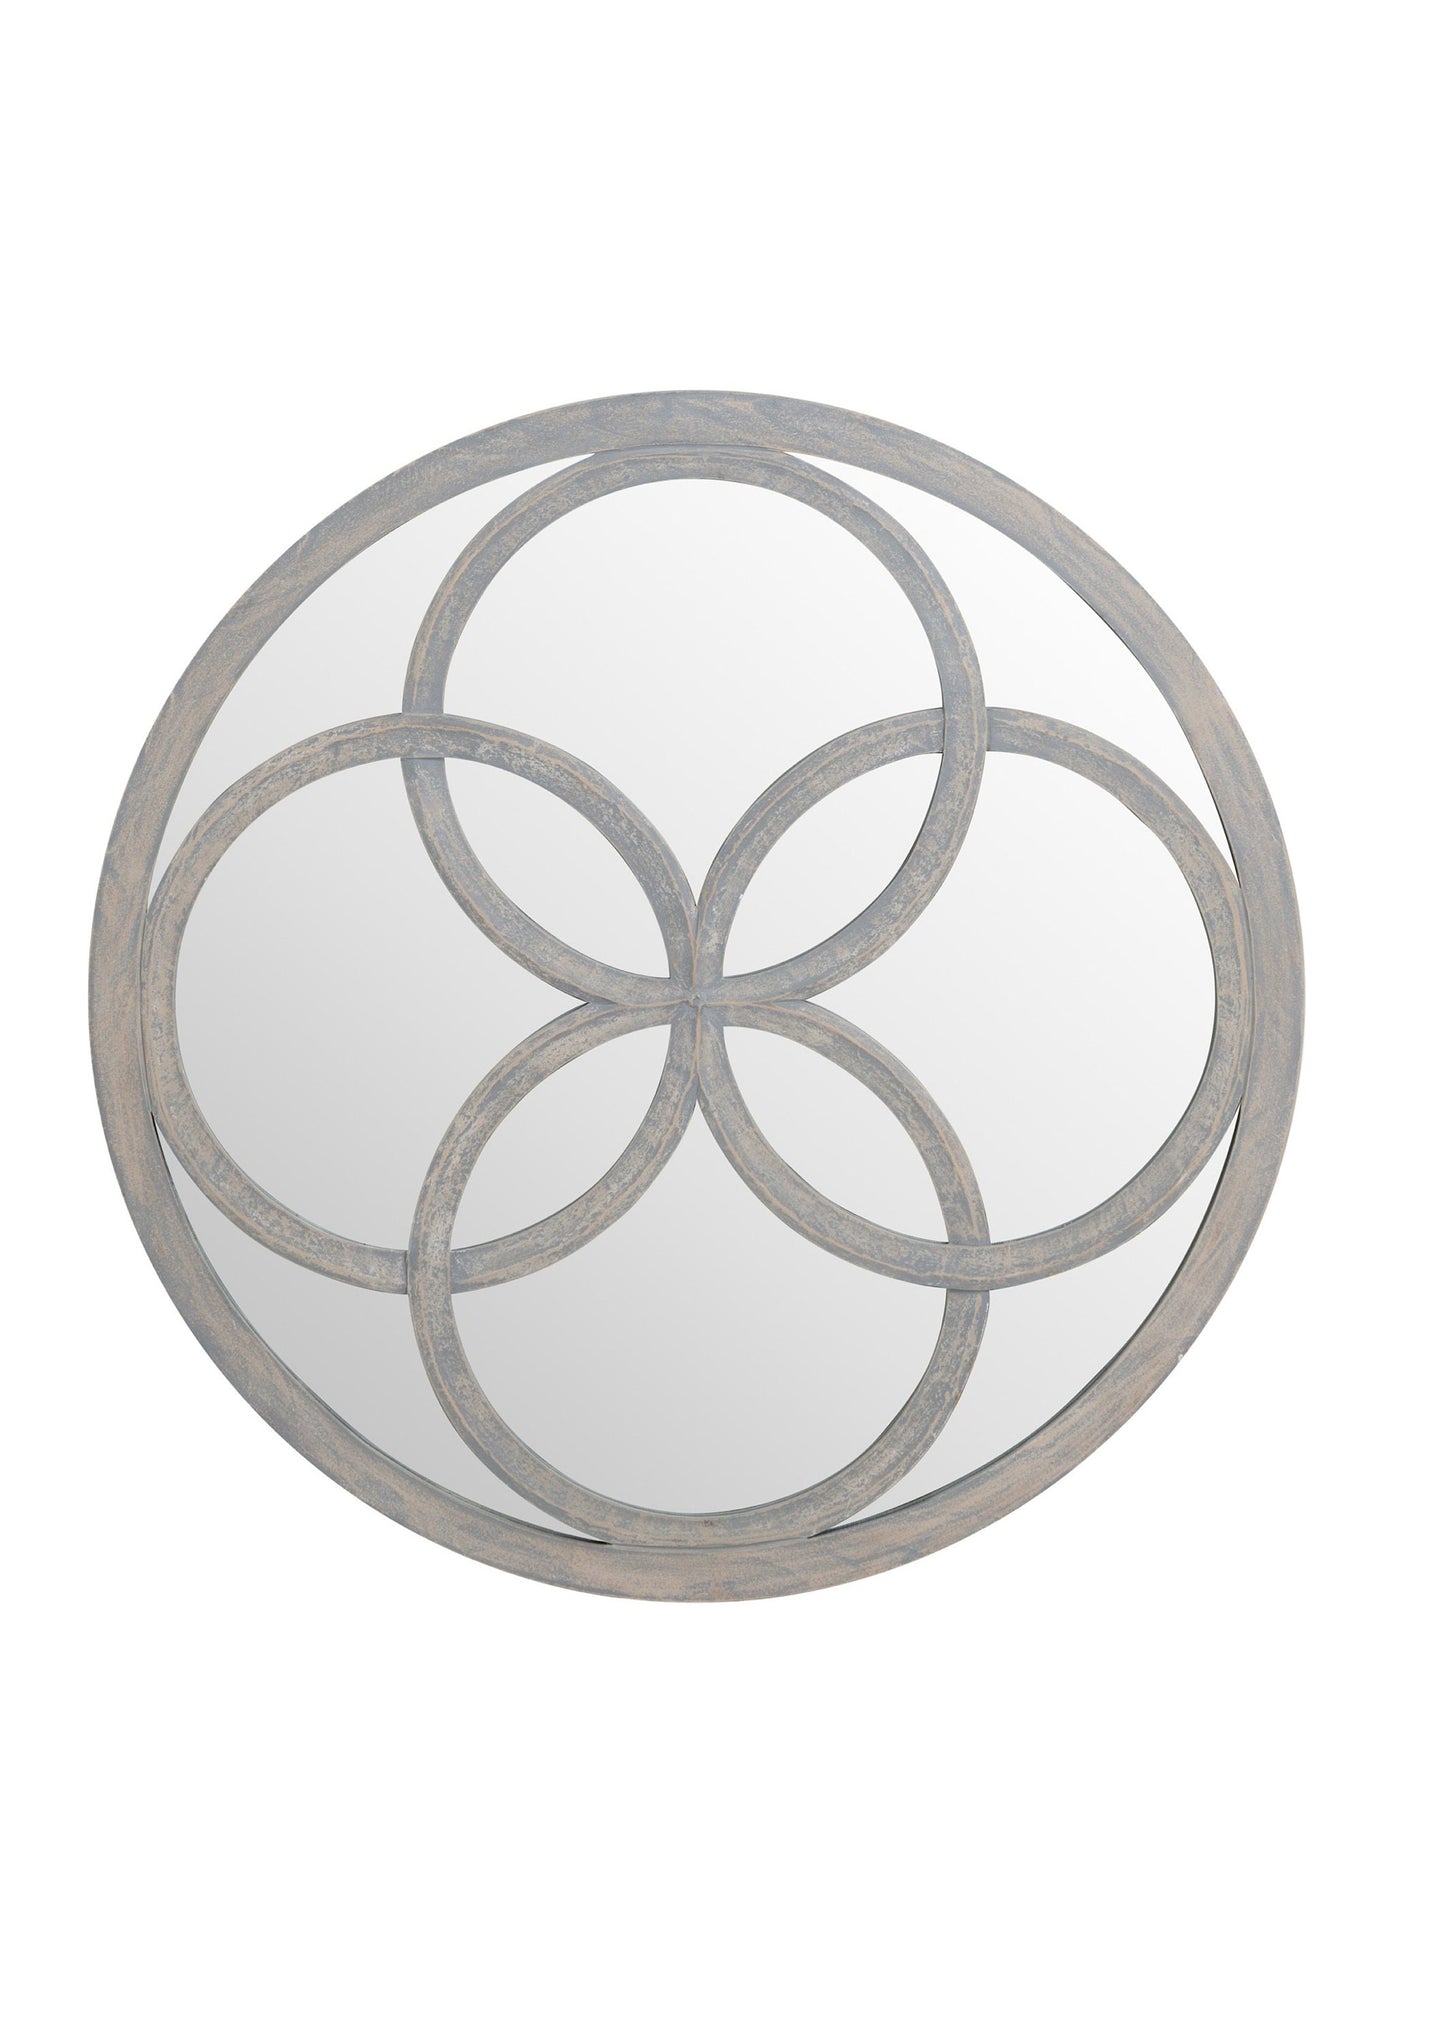 Beautiful and Stylish Flower Design Round Mirror in soft grey wood Large 90cm